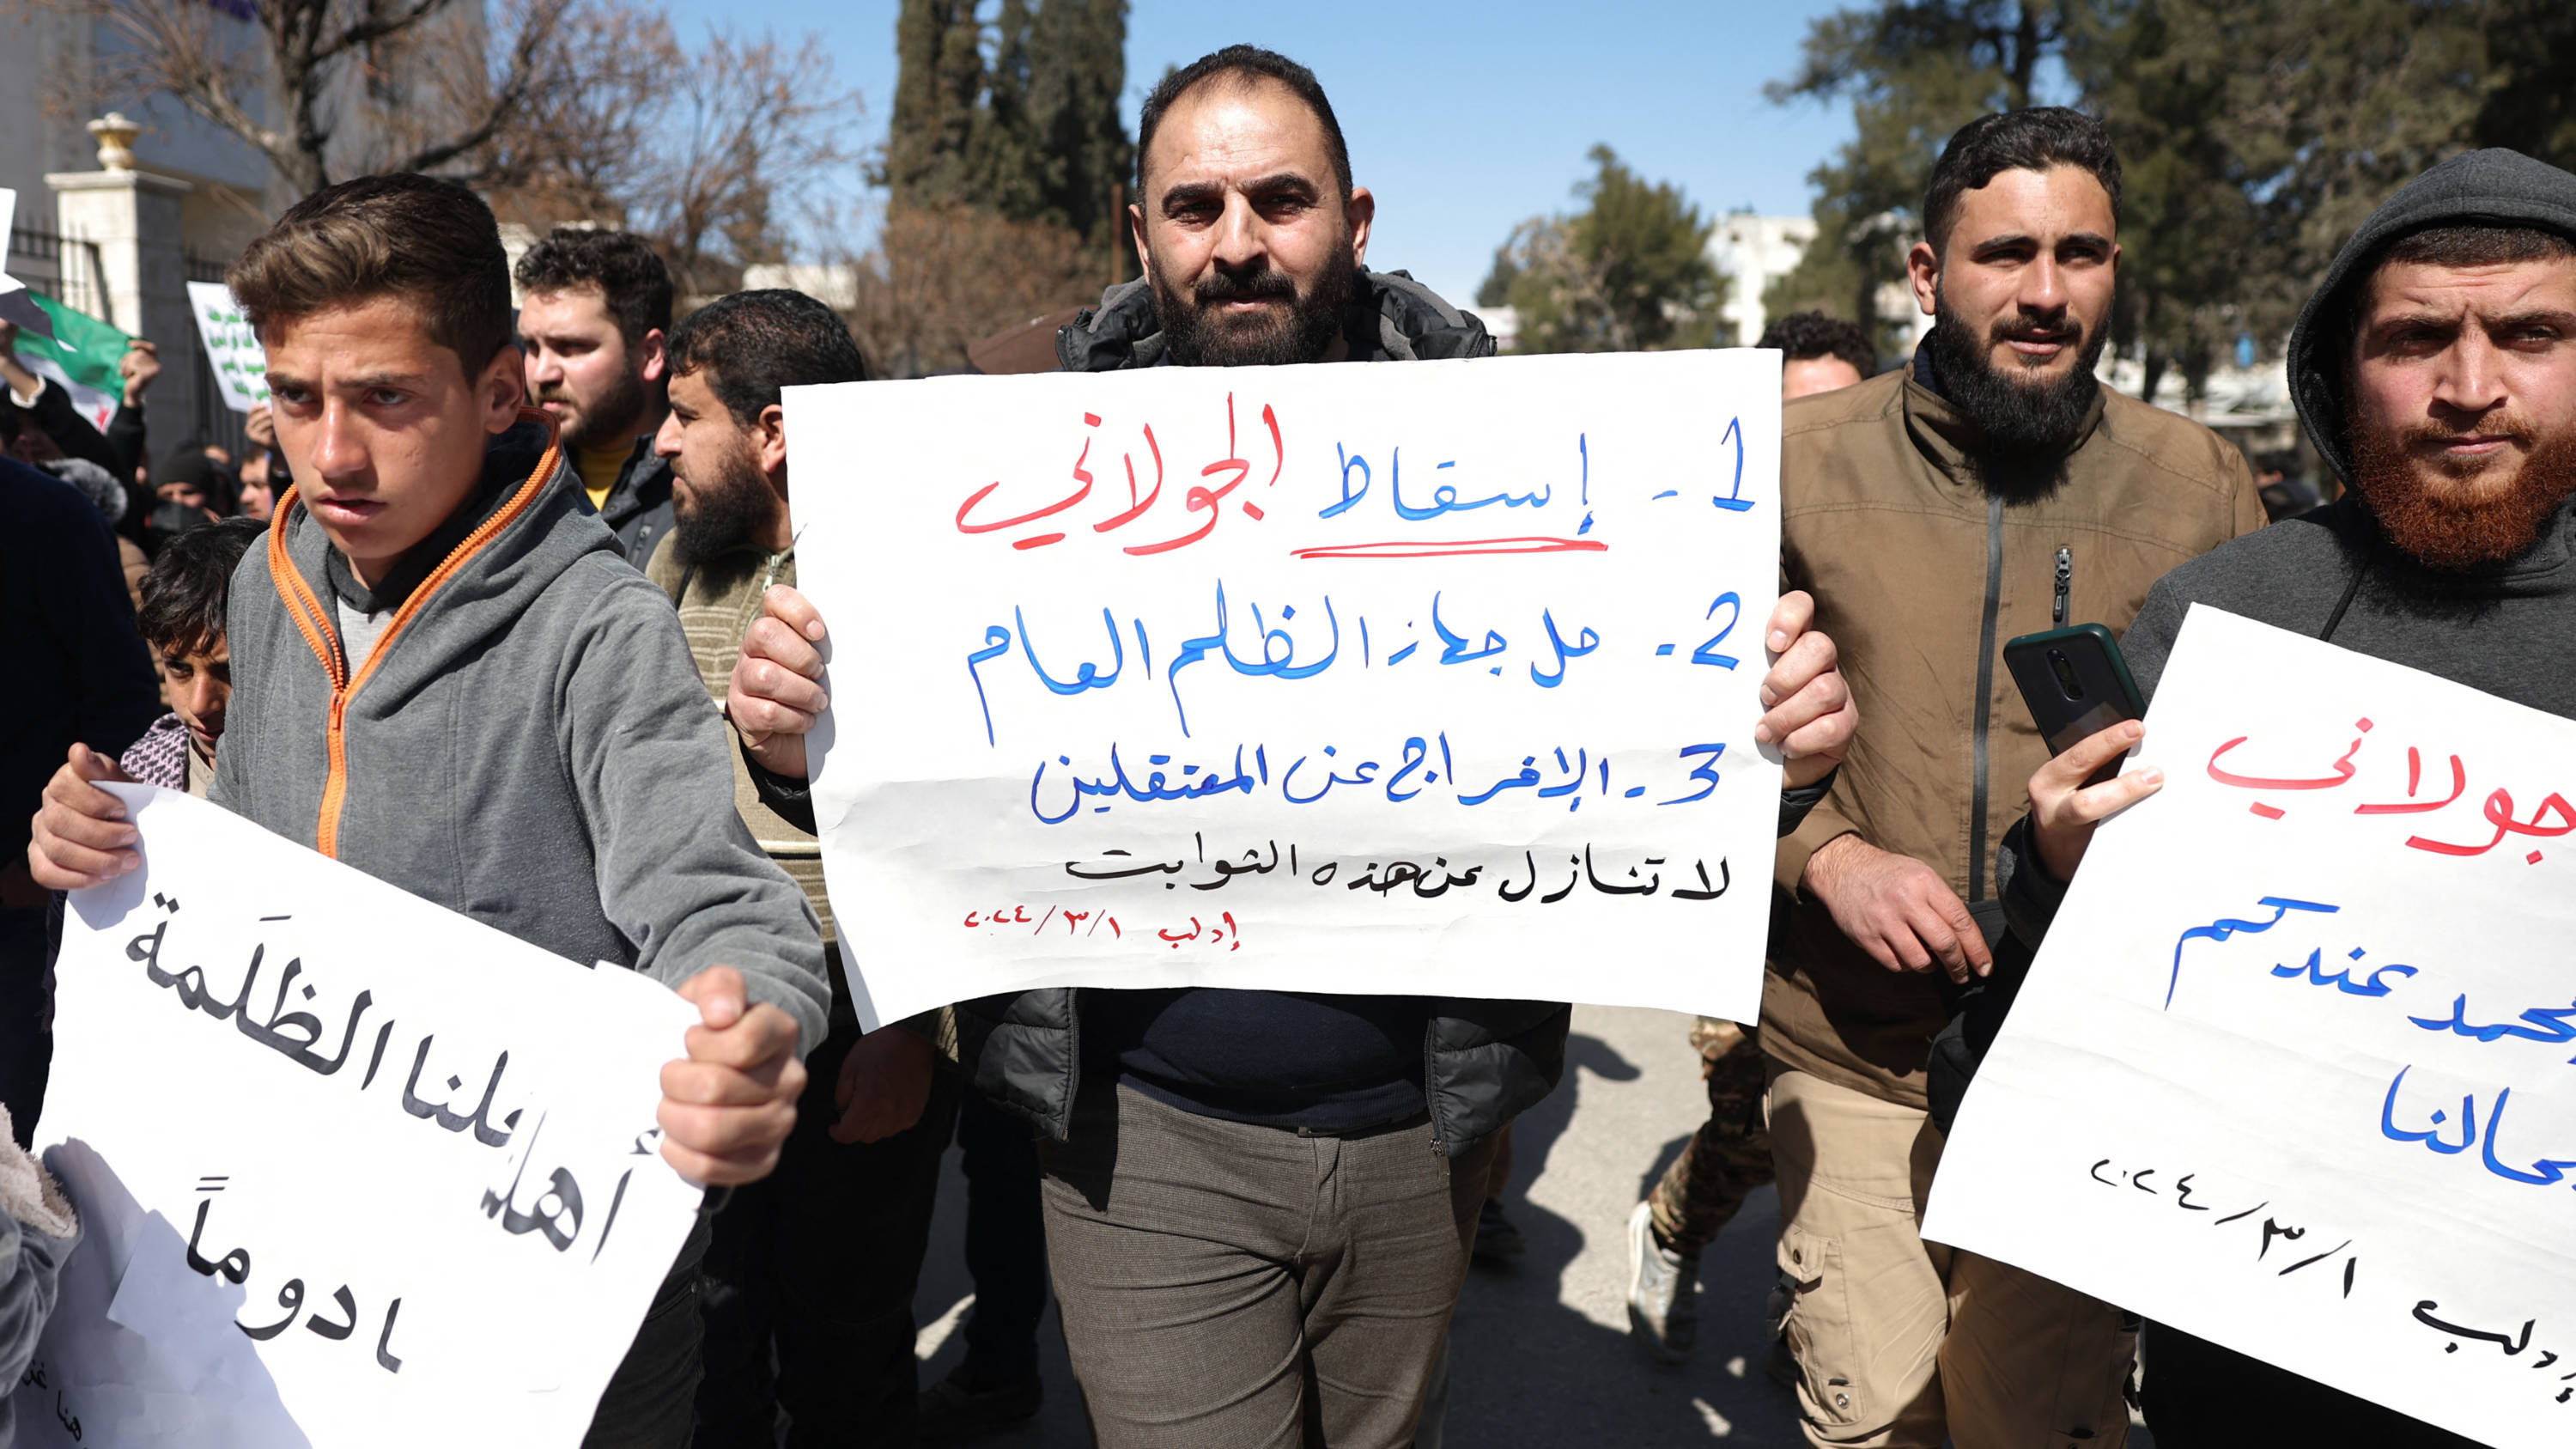 Protesters rally in the town of Idlib in Syria's northwestern Idlib province on 1 March 2024 against Hayat Tahrir al-Sham (AFP)